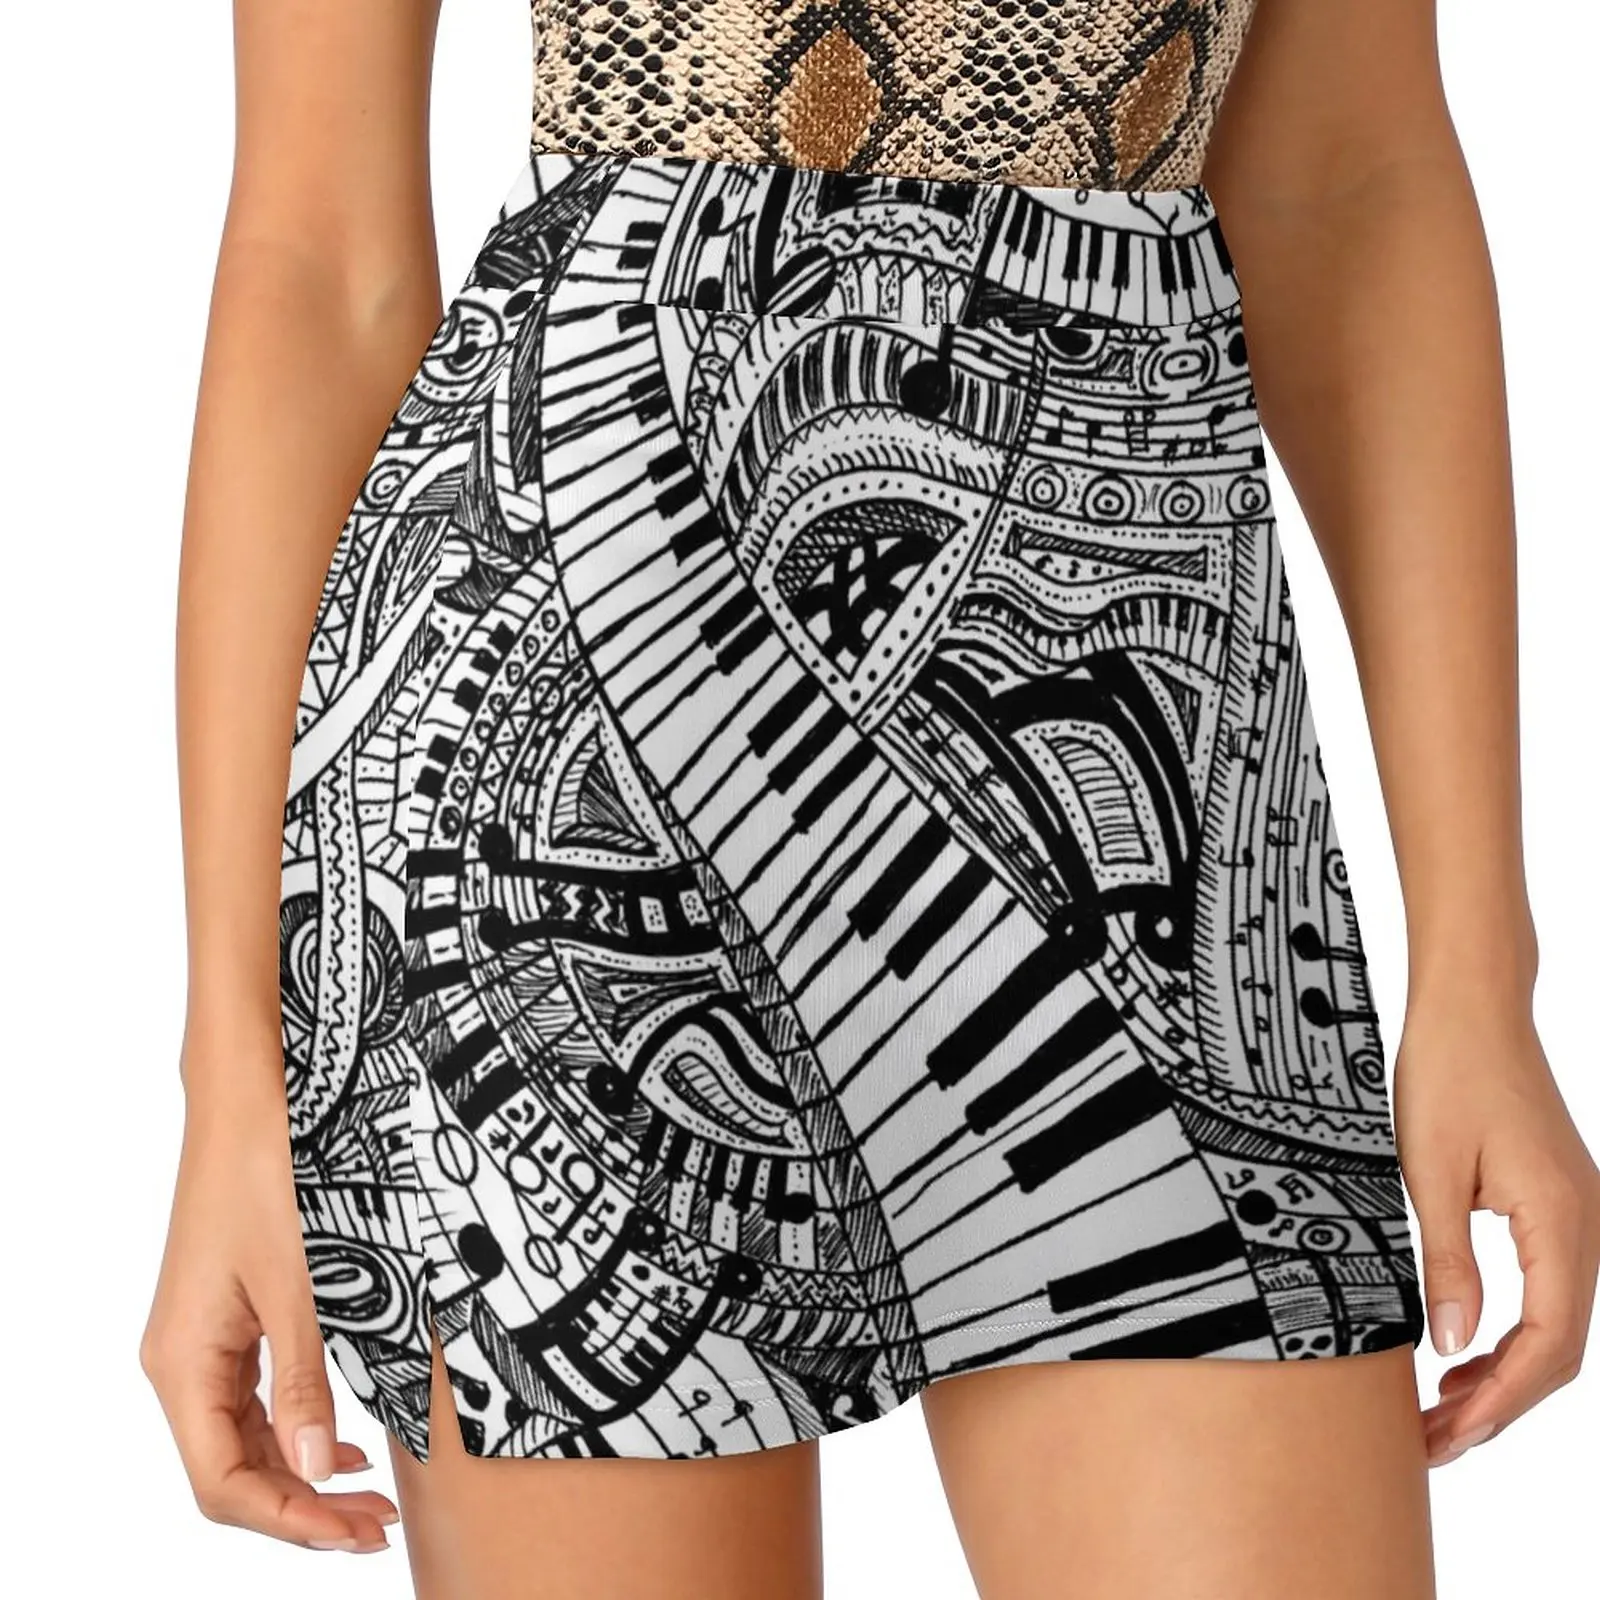 Classical music doodle with piano keyboard Light Proof Trouser Skirt novelty in clothes festival outfit women extreme mini dress the vampire queen music poster light proof trouser skirt miniskirt woman women clothes short skirts